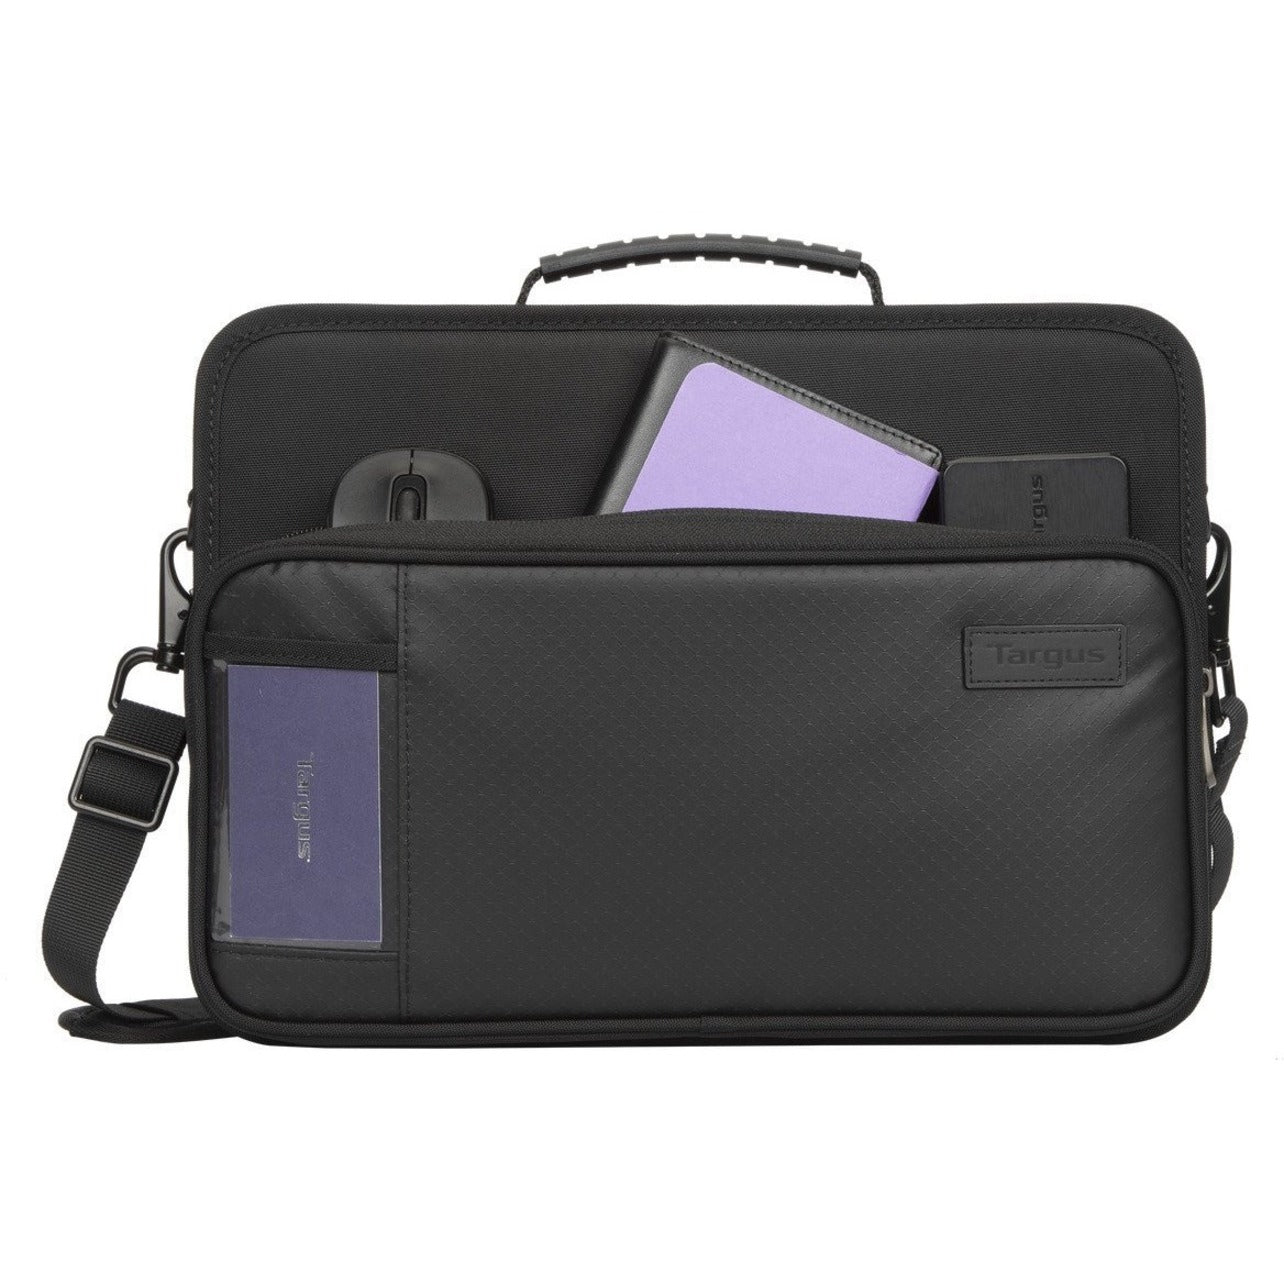 Targus Work-In TKC001 Carrying Case (Briefcase) for 11.6" Notebook Chromebook - Black